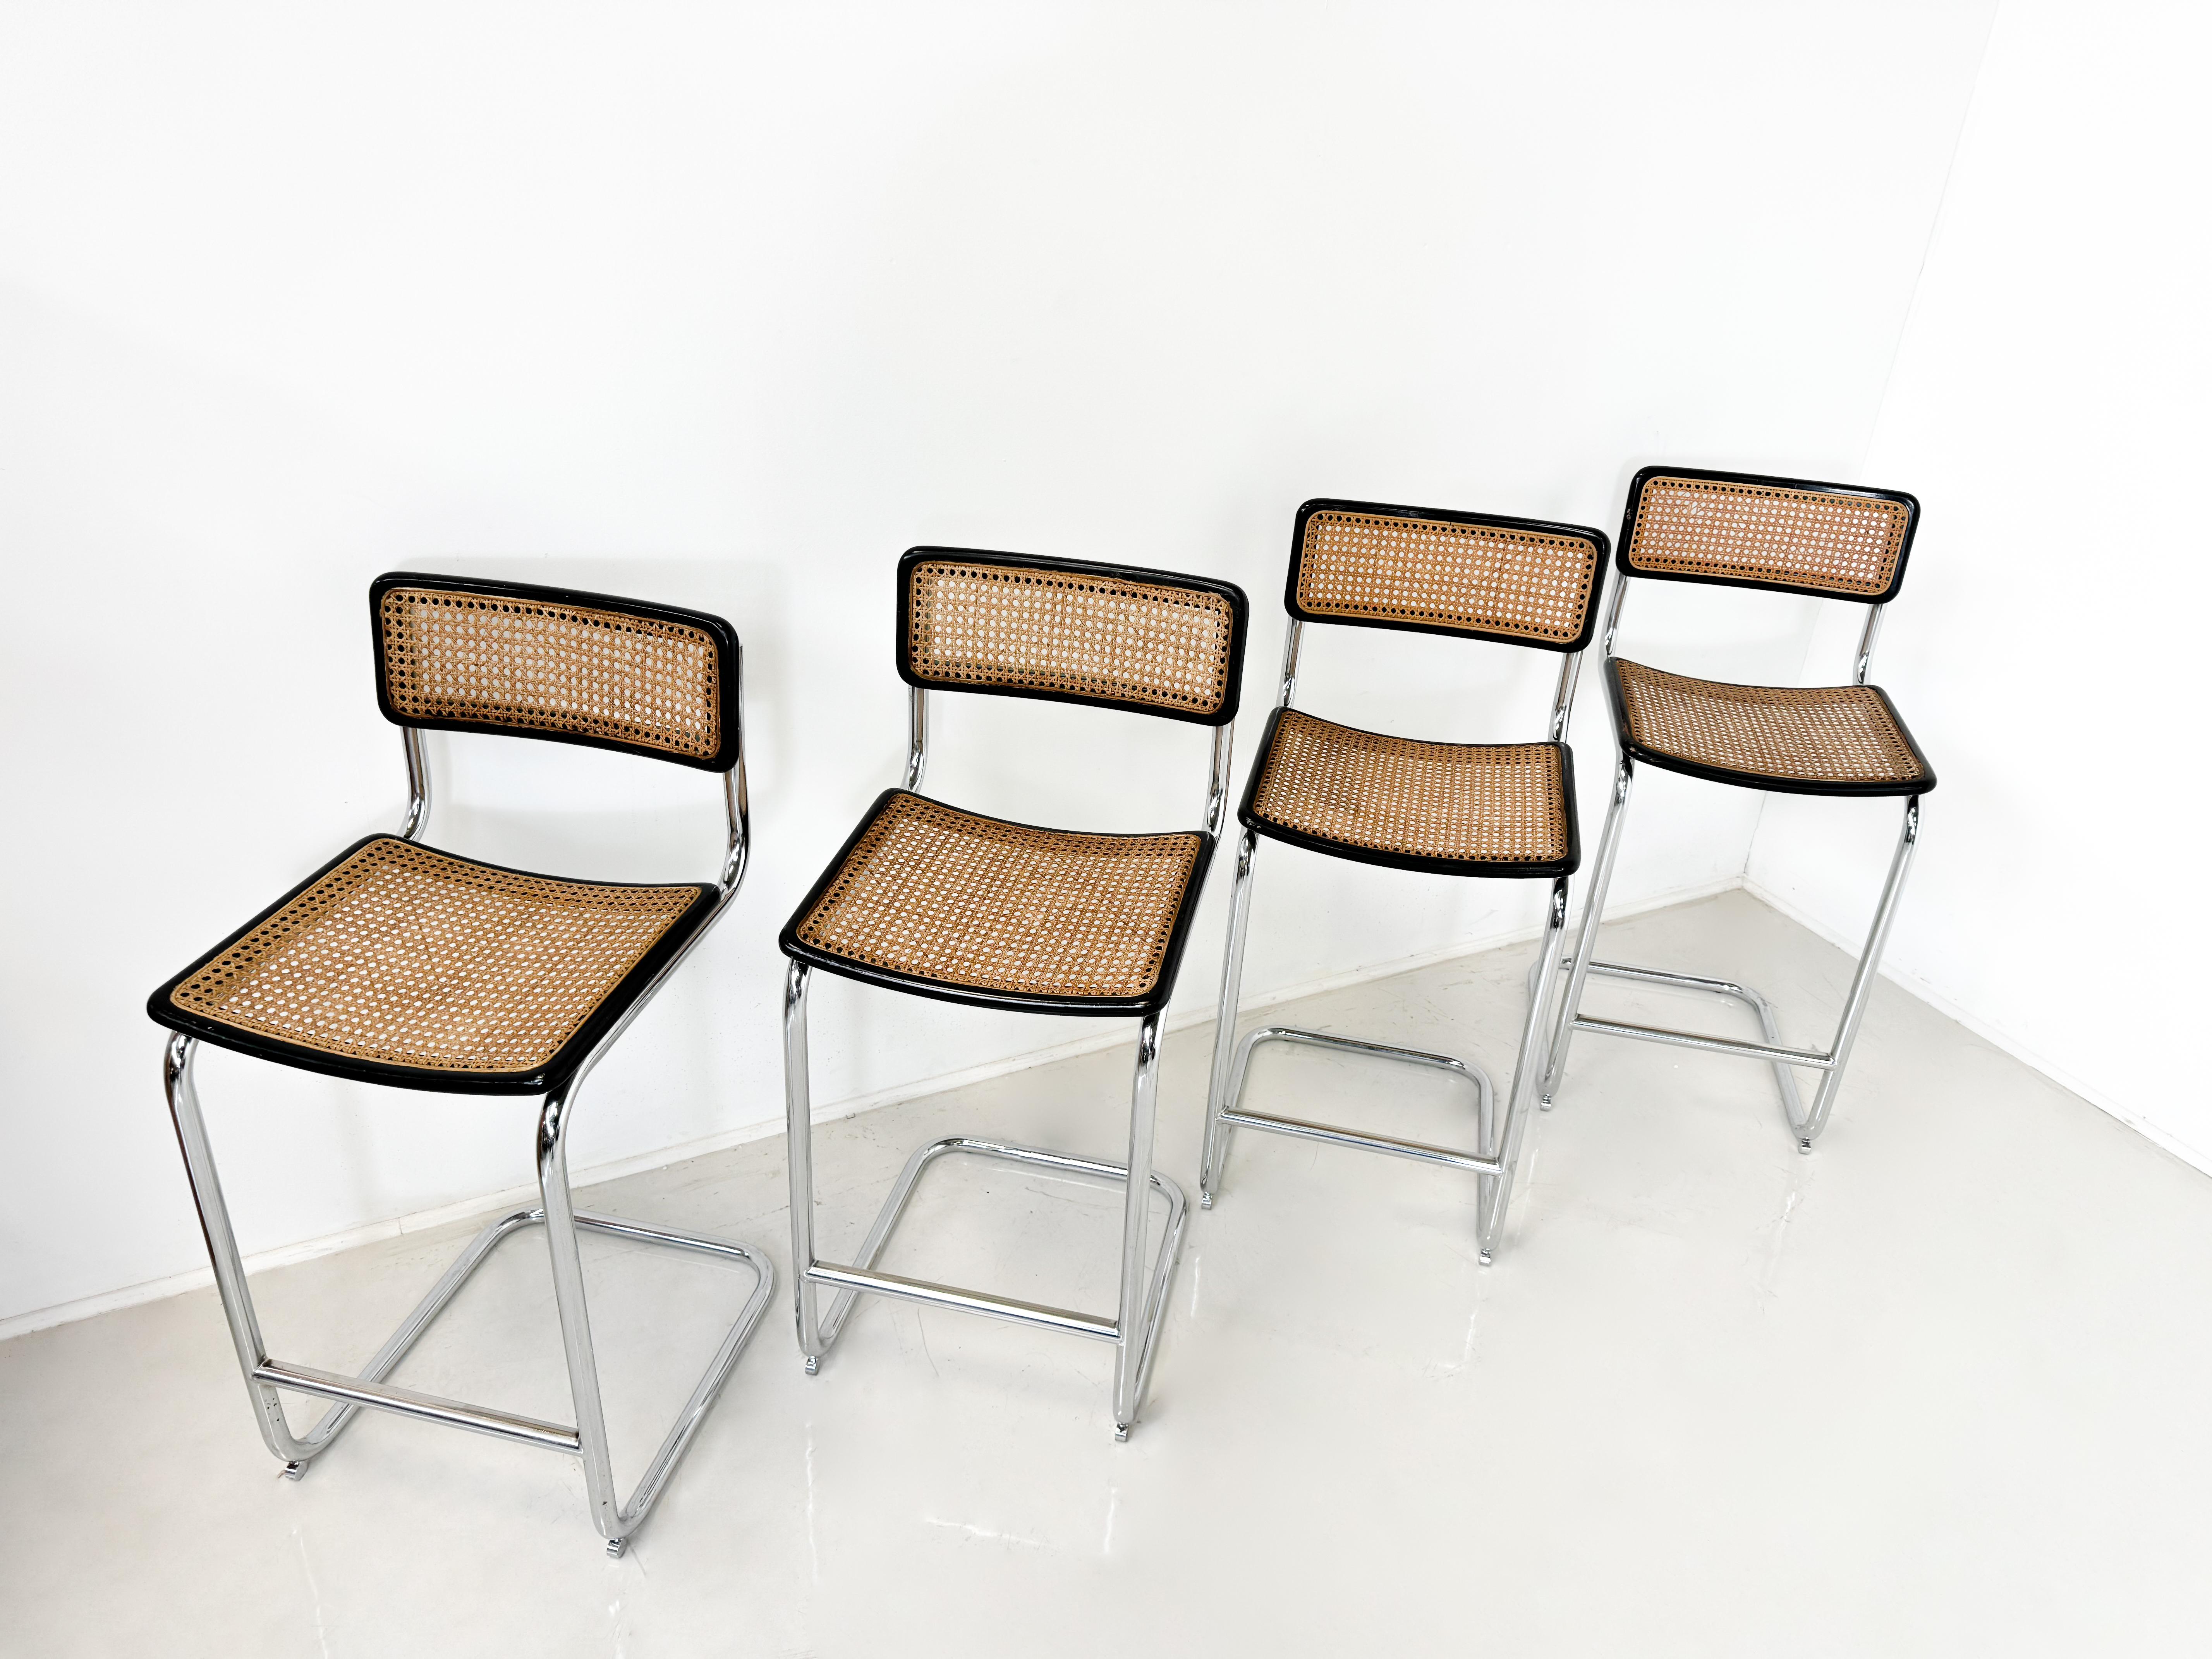 Late 20th Century Mid-Century Modern Bar Stool,  Marcel Breuer Style, 1970s - 4 Available  For Sale